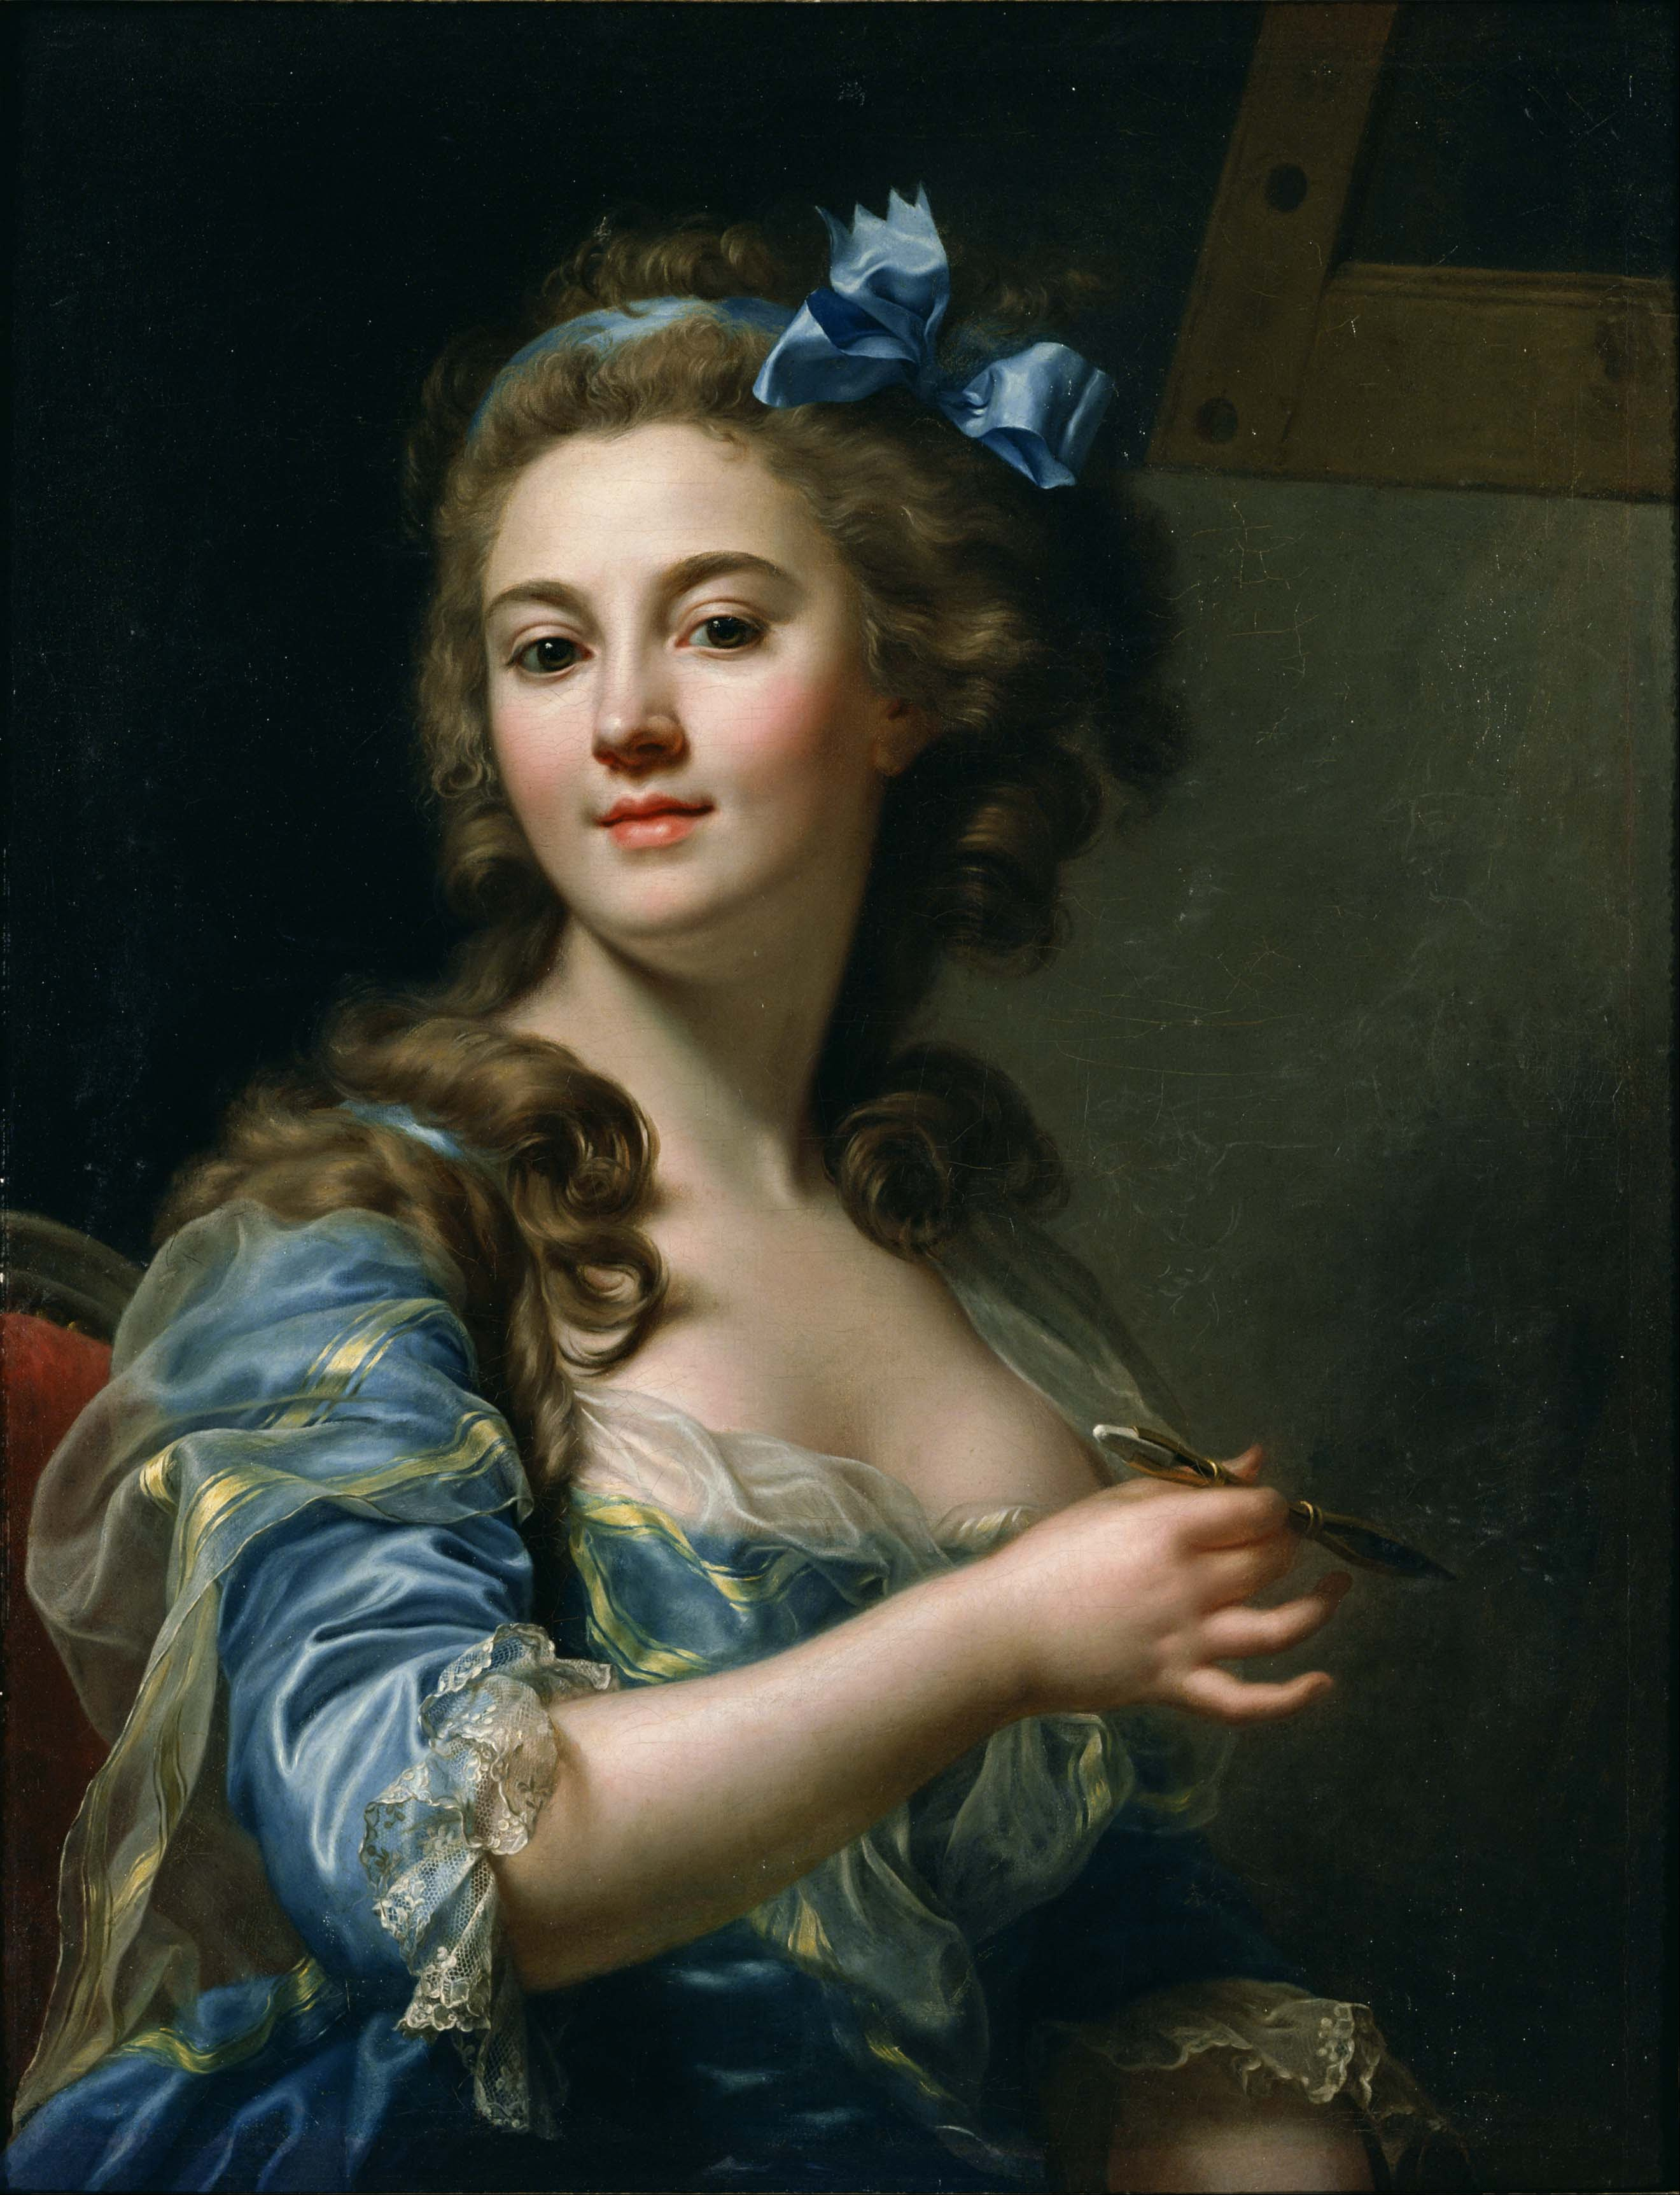 Self-Portrait by Marie-Gabrielle Capet - ca. 1783 - 59.5 x 77.5 cm The National Museum of Western Art, Tokyo